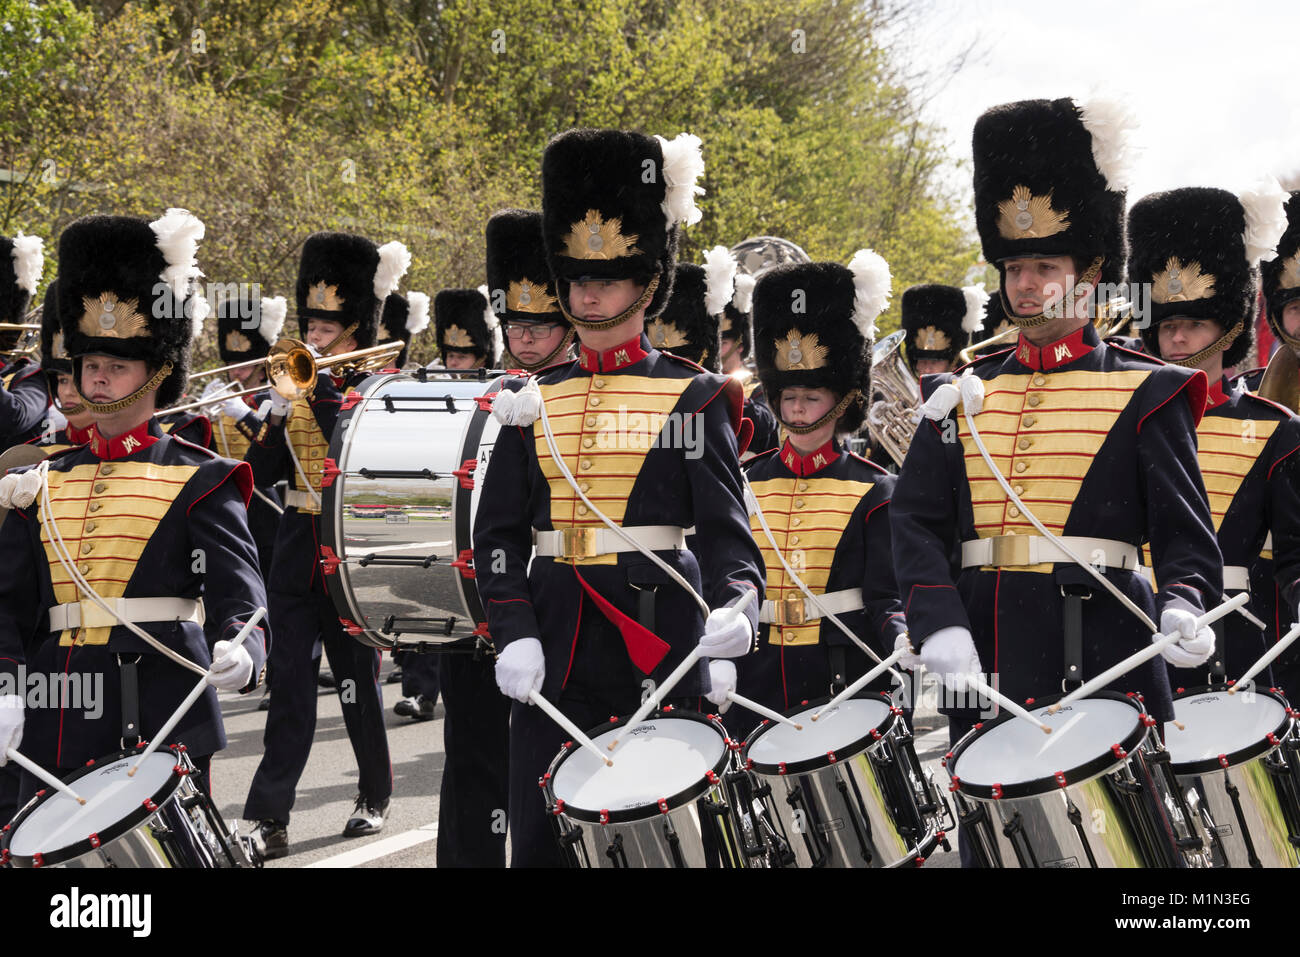 The Drum and Showband Adest Musica, a marching band from Sassenheim in Holland, taking part in the annual flower parade. The parade  involves  twenty  Stock Photo